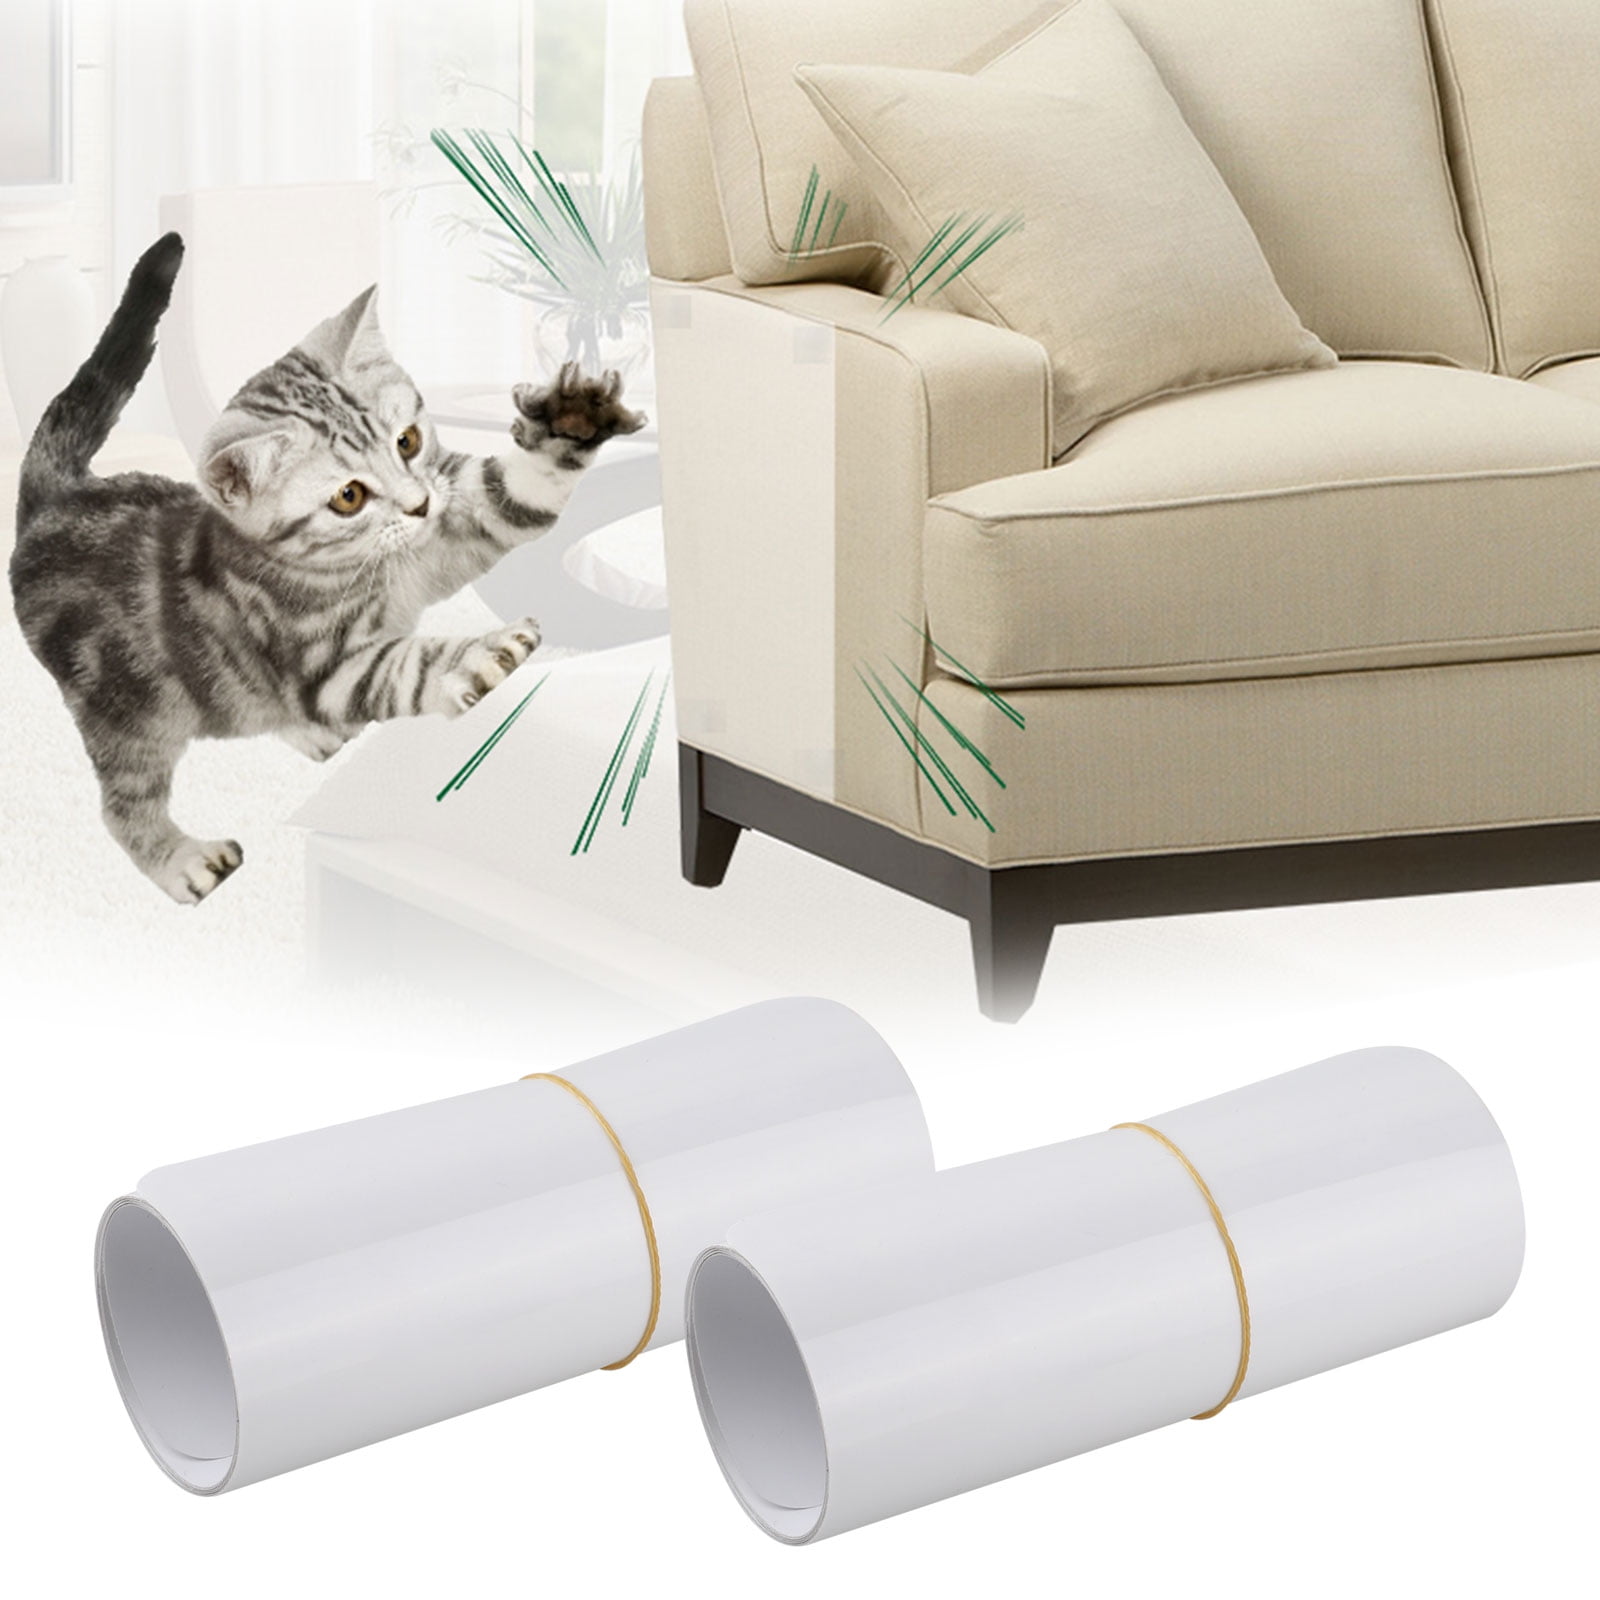 COUCH GUARD Includes 2 SELF-Adhesive Protector Pads 30 Long x 8 Wide The CAT Claw Protector